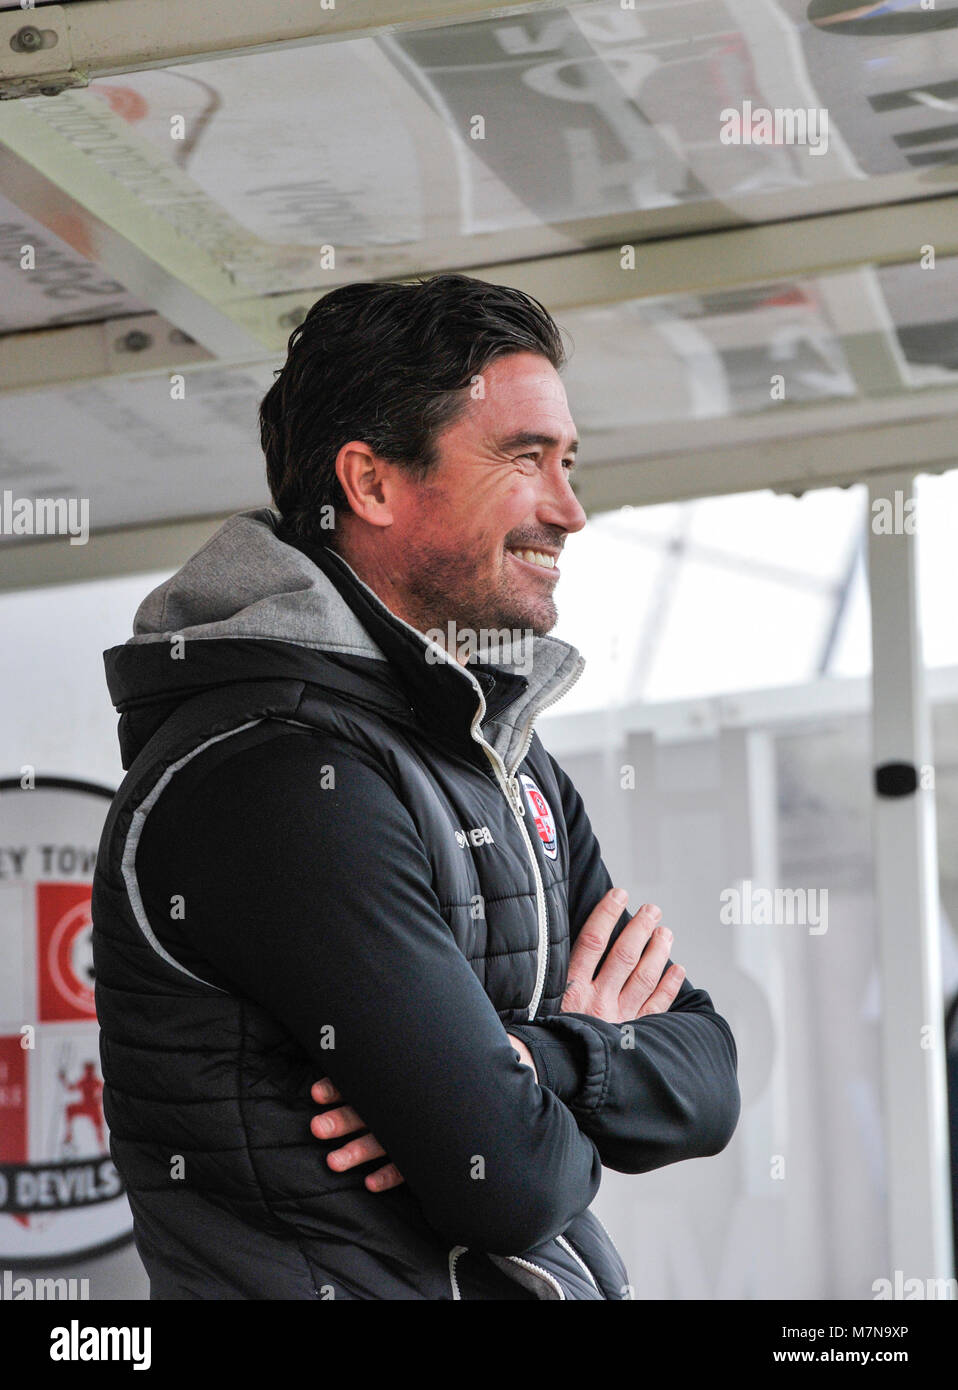 Crawley head coach Harry Kewell looks relaxed before the Sky Bet League 2 match between Crawley Town and Morecambe at the Checkatrade Stadium in Crawley. 10 Mar 2018 - Editorial use only. No merchandising. For Football images FA and Premier League restrictions apply inc. no internet/mobile usage without FAPL license - for details contact Football Dataco Stock Photo